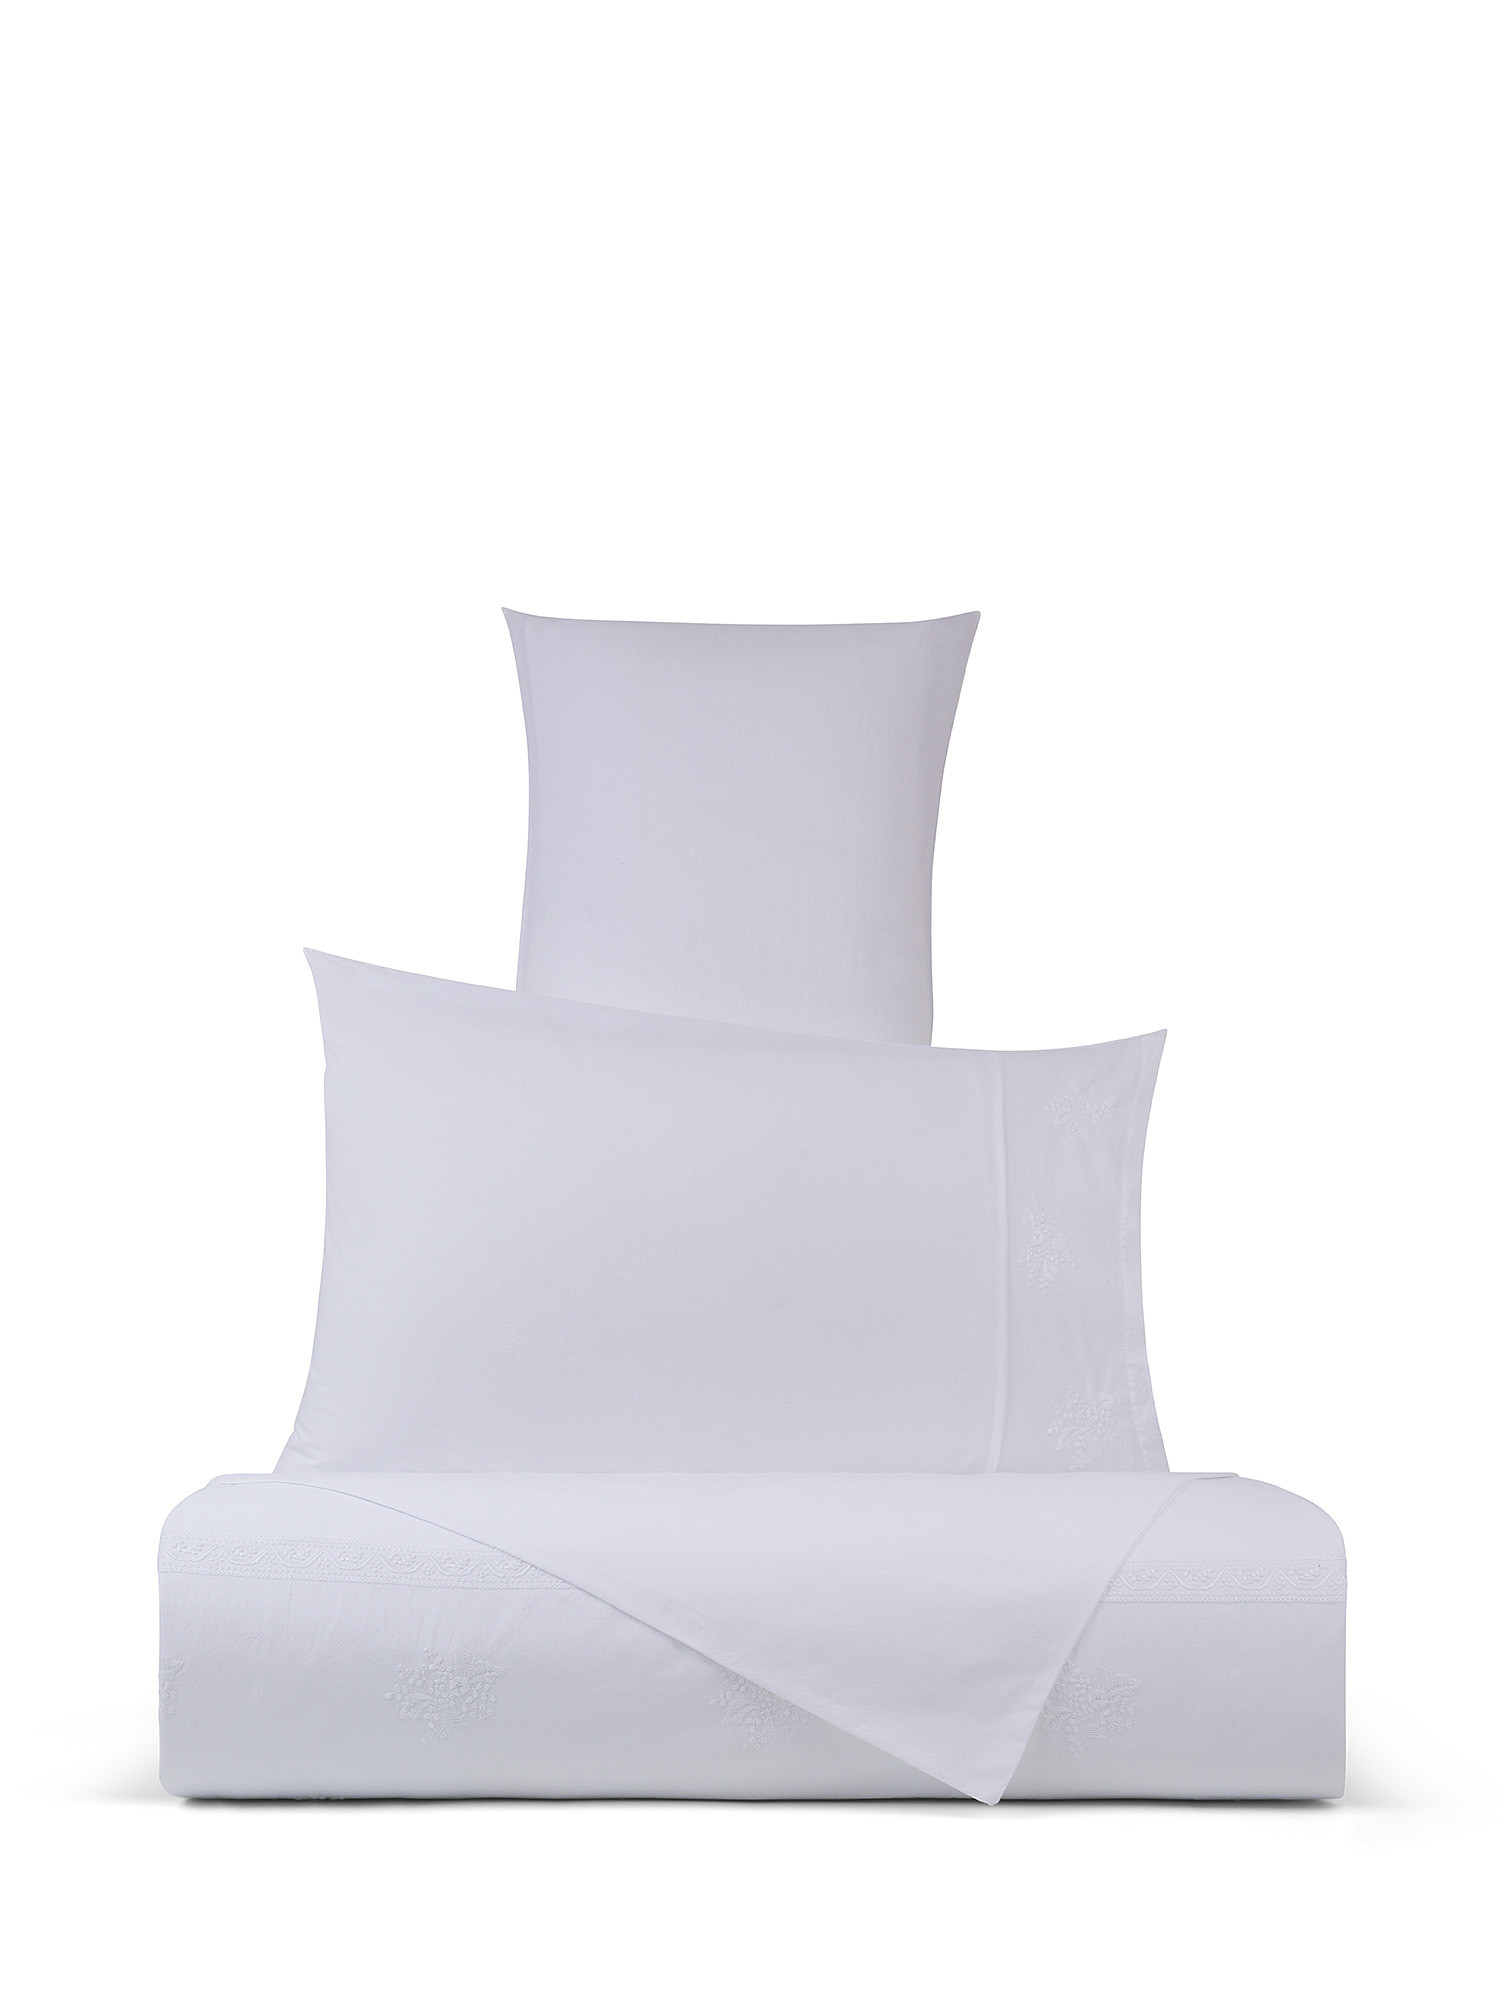 Portofino embroidered cotton percale duvet cover, White, large image number 0